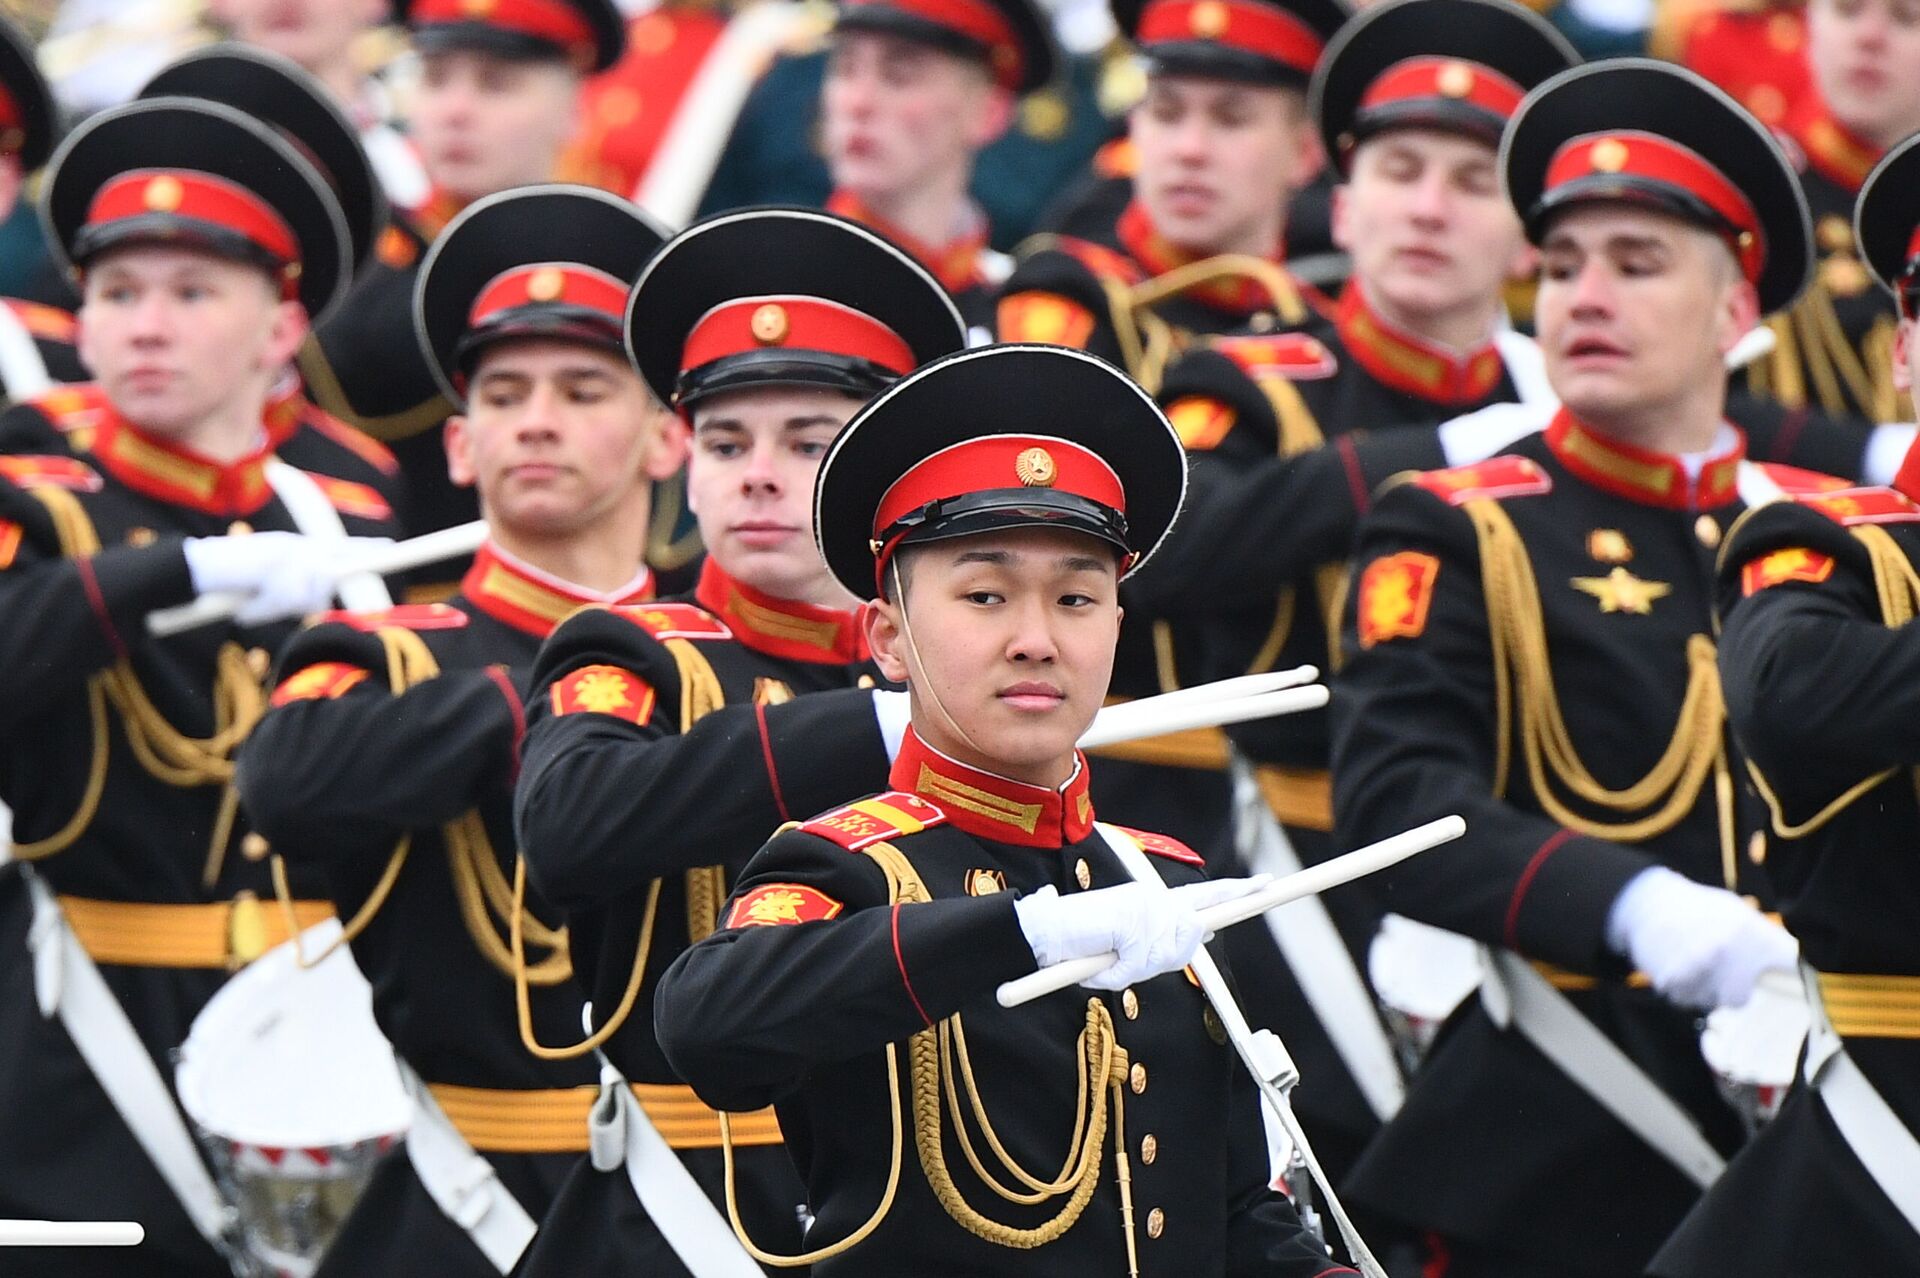 WWII’s Lessons, Combat Robots and Russia’s Women Warriors: Highlights From the Moscow Victory Parade - Sputnik International, 1920, 09.05.2021